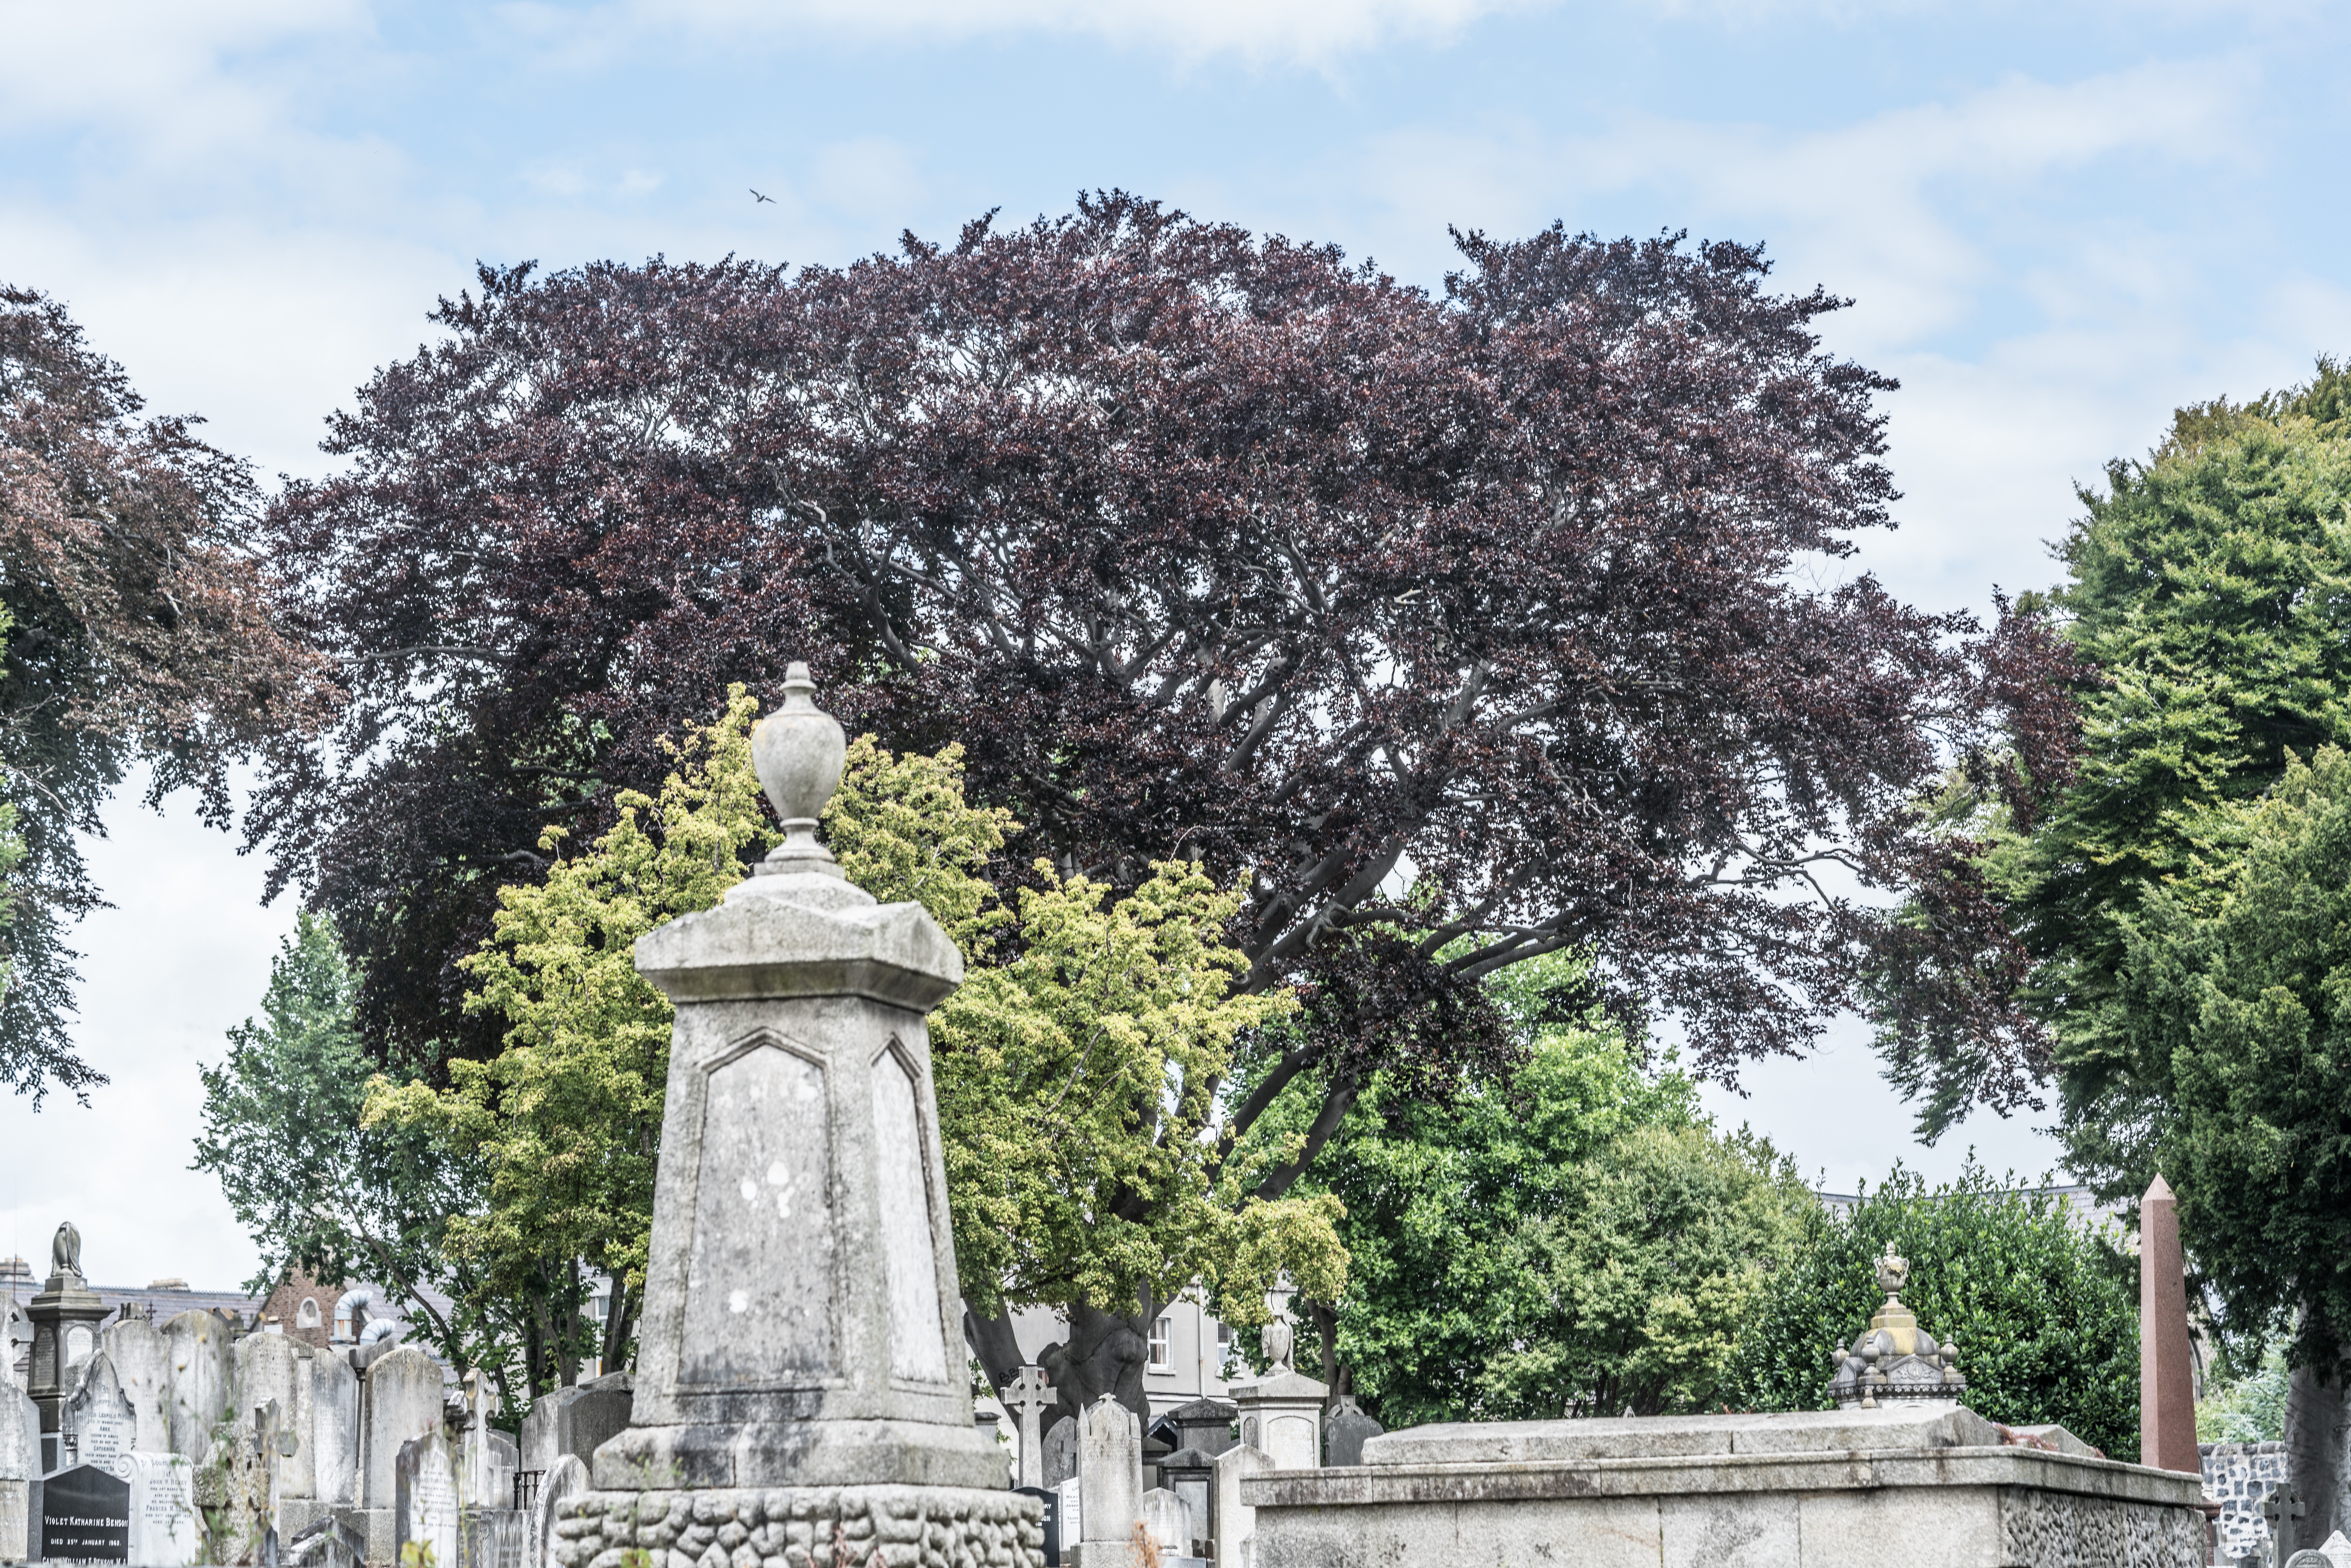  Mount Jerome Cemetery - August 2017 011 